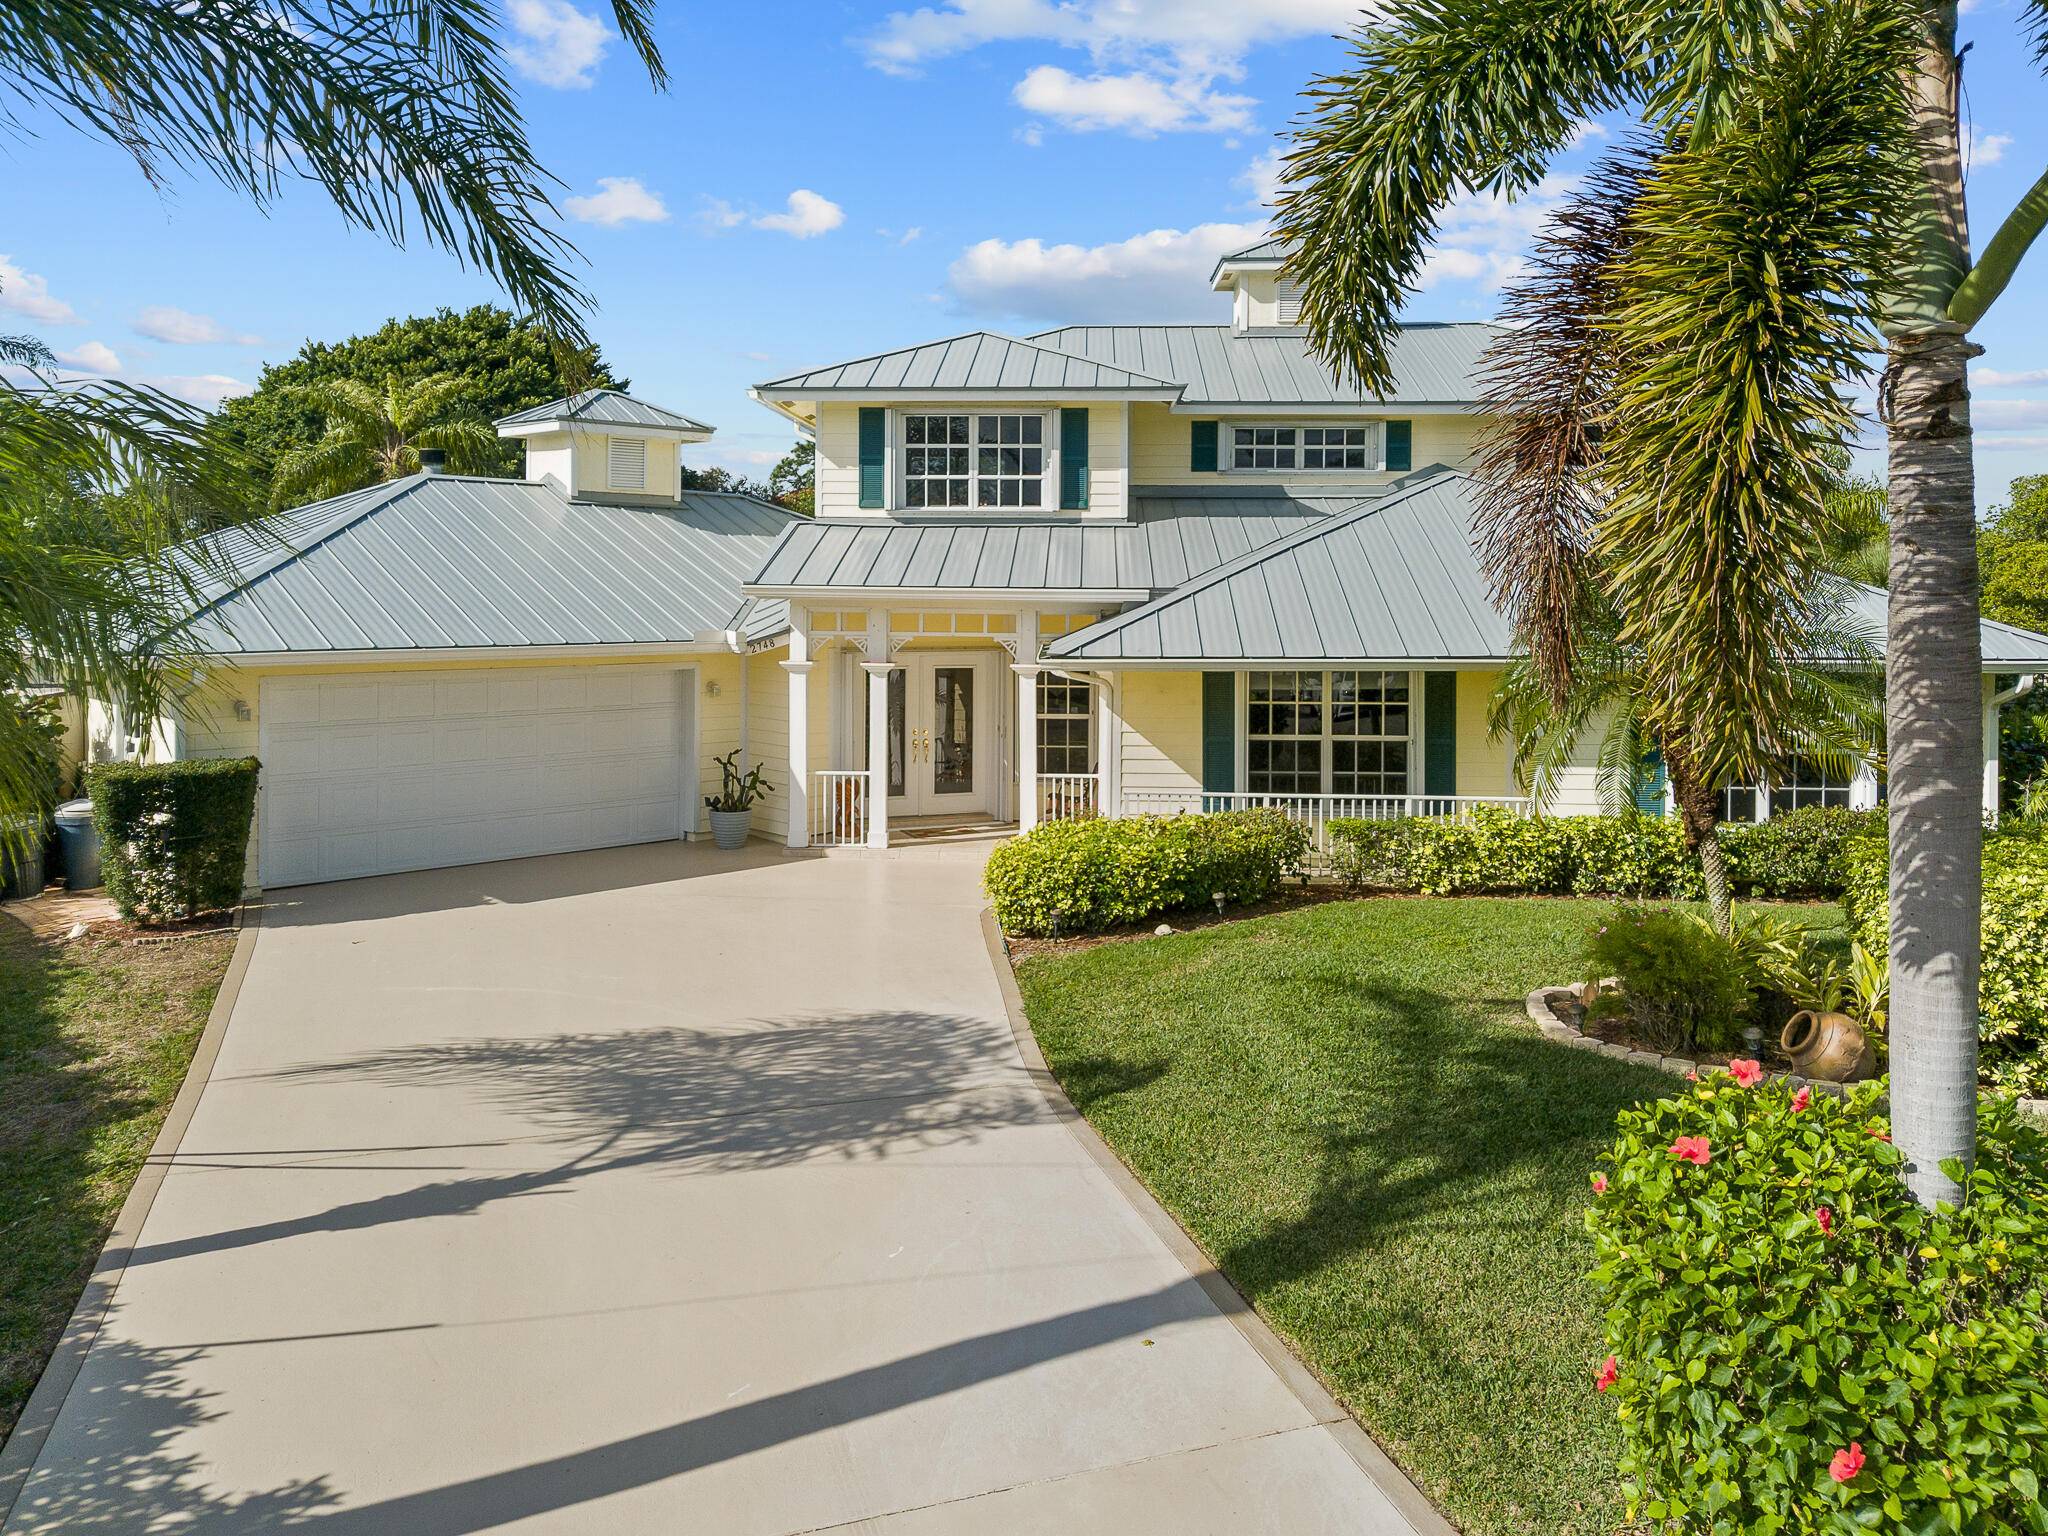 Live with dolphins and manatees in your backyard in this custom Key West style luxury home.